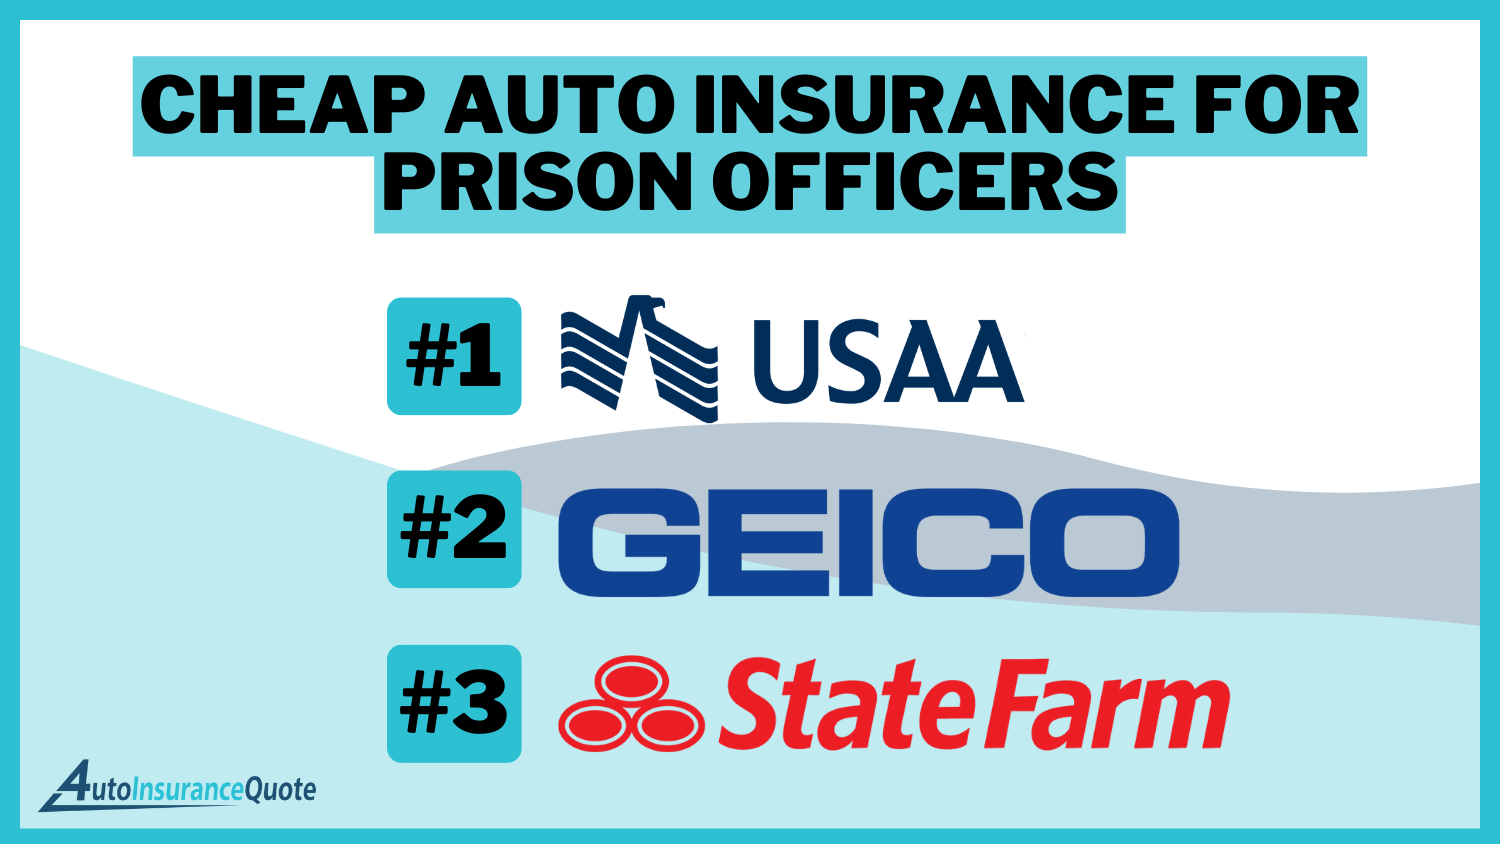 Cheap Auto Insurance for Prison Officers: USAA, Geico, and State Farm.